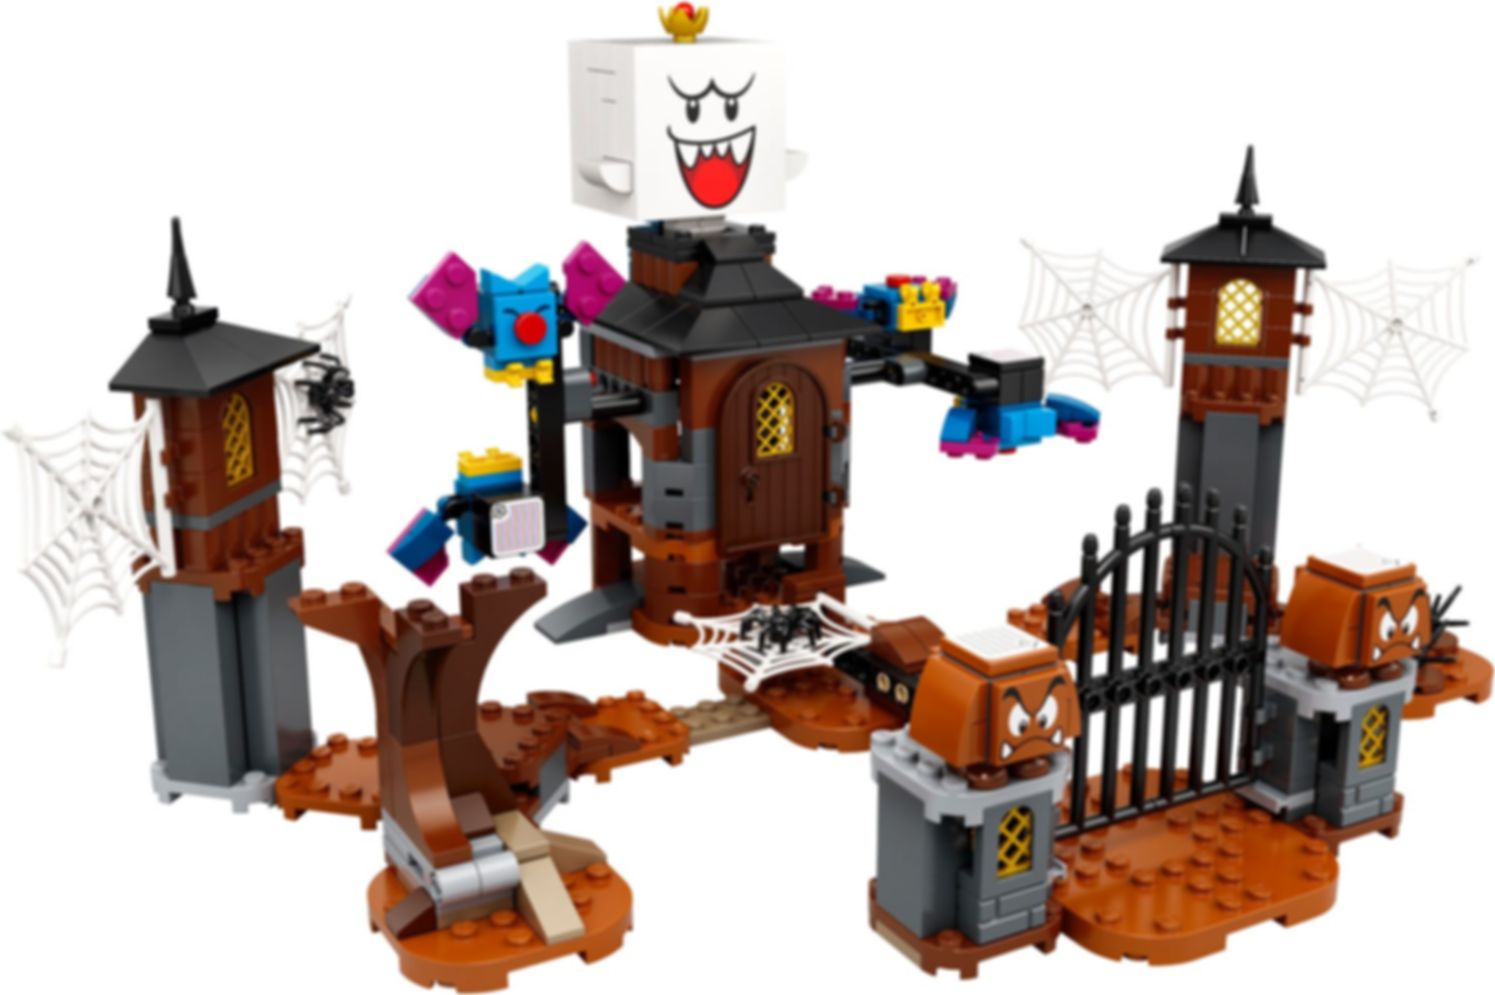 LEGO® Super Mario™ King Boo and the Haunted Yard Expansion Set components